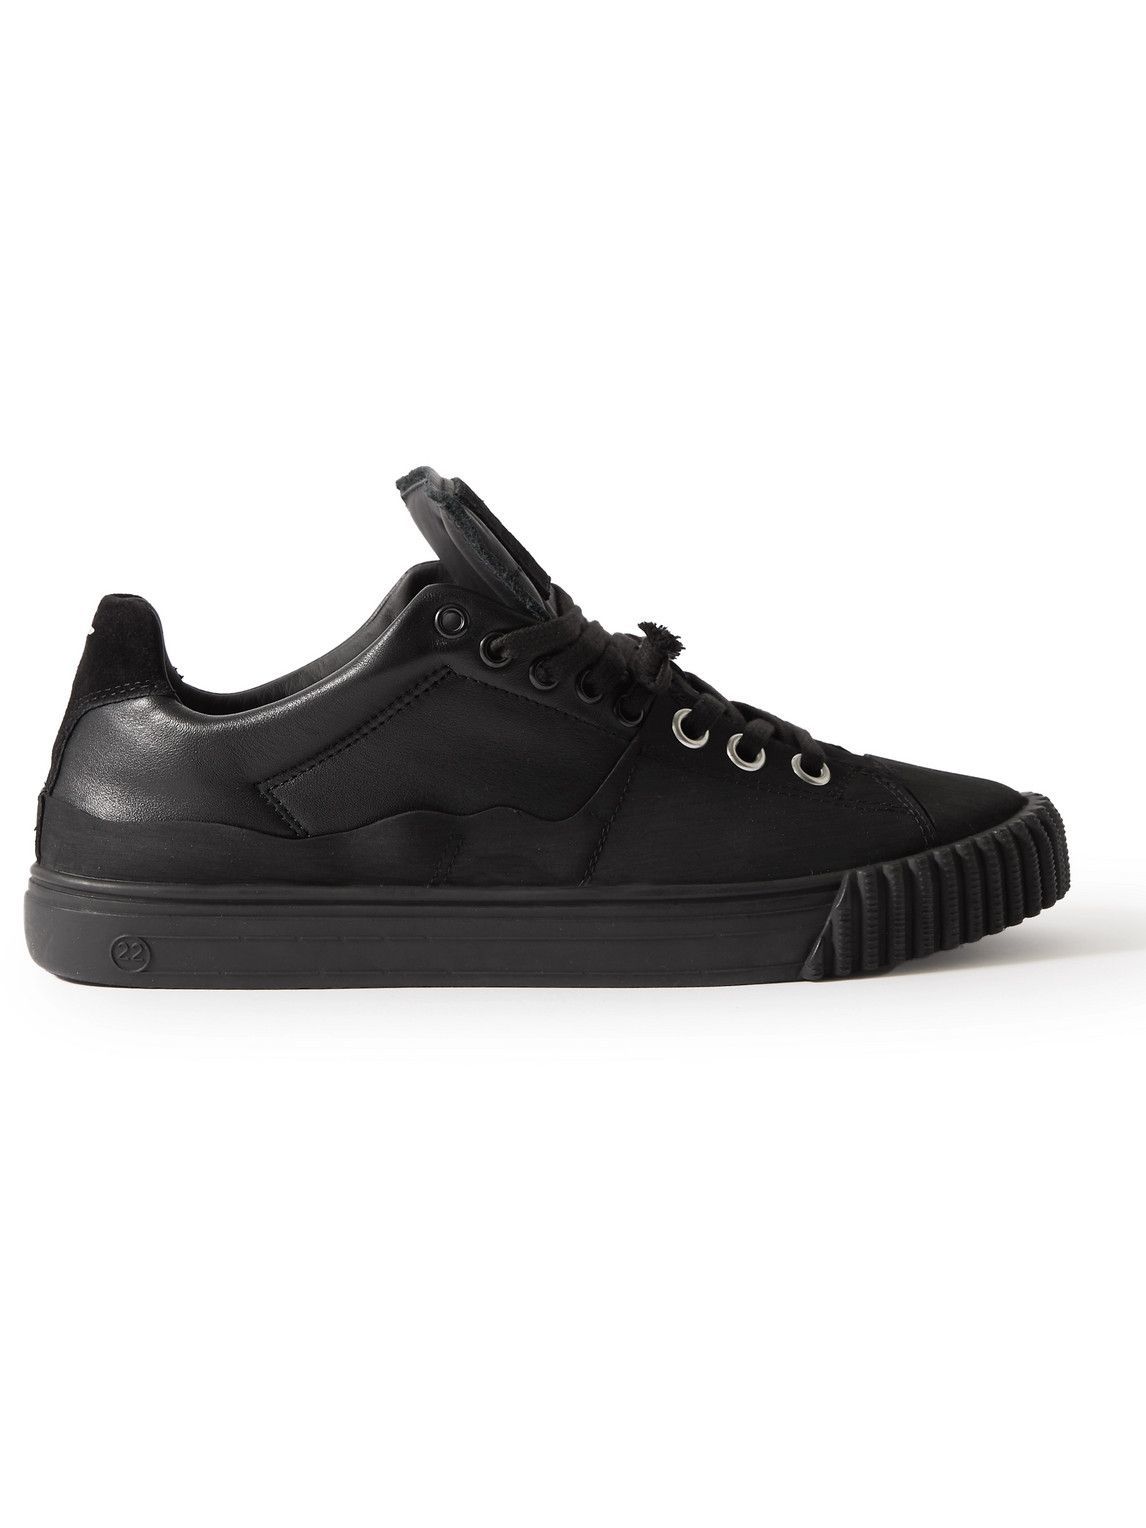 Maison Margiela - Suede-Trimmed Leather and Rubber Sneakers - Black ...